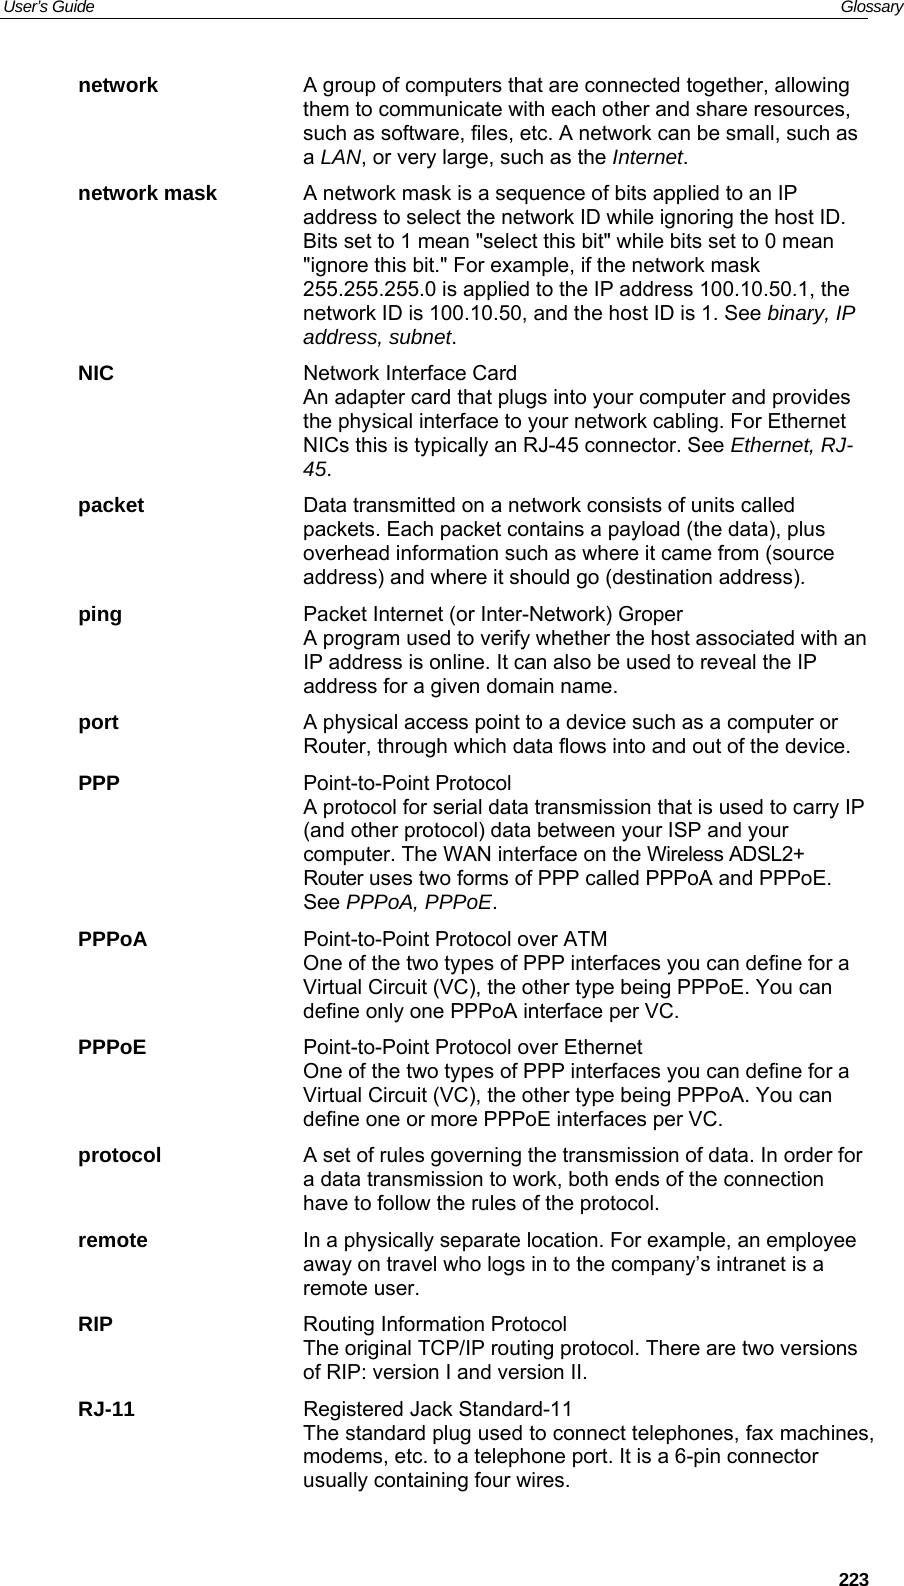 User’s Guide   Glossary  223network  A group of computers that are connected together, allowing them to communicate with each other and share resources, such as software, files, etc. A network can be small, such as a LAN, or very large, such as the Internet. network mask  A network mask is a sequence of bits applied to an IP address to select the network ID while ignoring the host ID. Bits set to 1 mean &quot;select this bit&quot; while bits set to 0 mean &quot;ignore this bit.&quot; For example, if the network mask 255.255.255.0 is applied to the IP address 100.10.50.1, the network ID is 100.10.50, and the host ID is 1. See binary, IP address, subnet. NIC  Network Interface Card An adapter card that plugs into your computer and provides the physical interface to your network cabling. For Ethernet NICs this is typically an RJ-45 connector. See Ethernet, RJ-45. packet  Data transmitted on a network consists of units called packets. Each packet contains a payload (the data), plus overhead information such as where it came from (source address) and where it should go (destination address). ping  Packet Internet (or Inter-Network) Groper A program used to verify whether the host associated with an IP address is online. It can also be used to reveal the IP address for a given domain name.  port  A physical access point to a device such as a computer or Router, through which data flows into and out of the device. PPP Point-to-Point Protocol A protocol for serial data transmission that is used to carry IP (and other protocol) data between your ISP and your computer. The WAN interface on the Wireless ADSL2+ Router uses two forms of PPP called PPPoA and PPPoE. See PPPoA, PPPoE. PPPoA  Point-to-Point Protocol over ATM One of the two types of PPP interfaces you can define for a Virtual Circuit (VC), the other type being PPPoE. You can define only one PPPoA interface per VC. PPPoE  Point-to-Point Protocol over Ethernet One of the two types of PPP interfaces you can define for a Virtual Circuit (VC), the other type being PPPoA. You can define one or more PPPoE interfaces per VC. protocol  A set of rules governing the transmission of data. In order for a data transmission to work, both ends of the connection have to follow the rules of the protocol. remote  In a physically separate location. For example, an employee away on travel who logs in to the company’s intranet is a remote user. RIP  Routing Information Protocol The original TCP/IP routing protocol. There are two versions of RIP: version I and version II.  RJ-11  Registered Jack Standard-11 The standard plug used to connect telephones, fax machines, modems, etc. to a telephone port. It is a 6-pin connector usually containing four wires. 